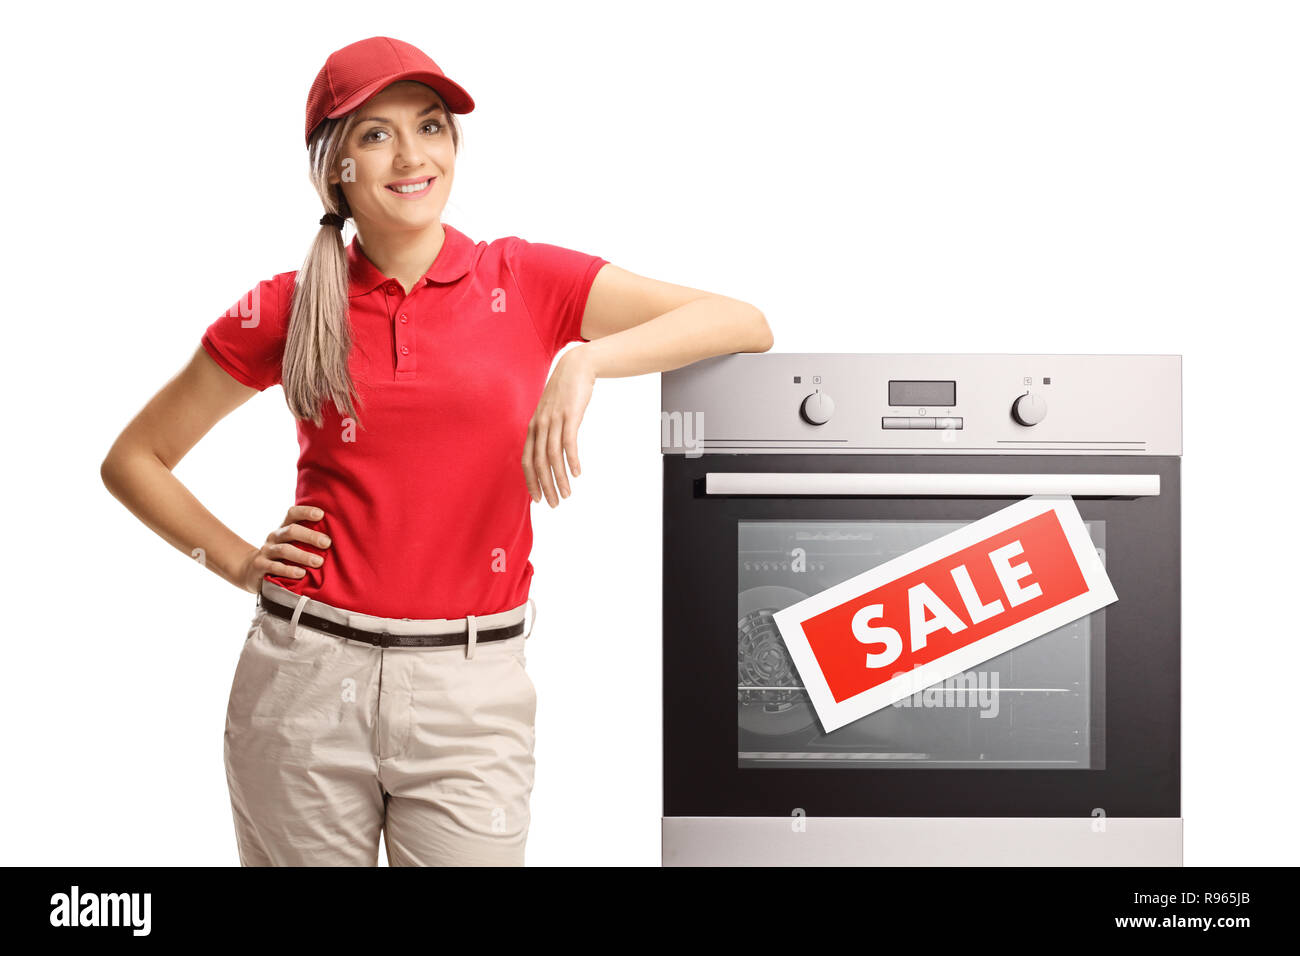 Female sales manager standing next to an electrcal oven on sale isolated on white background Stock Photo